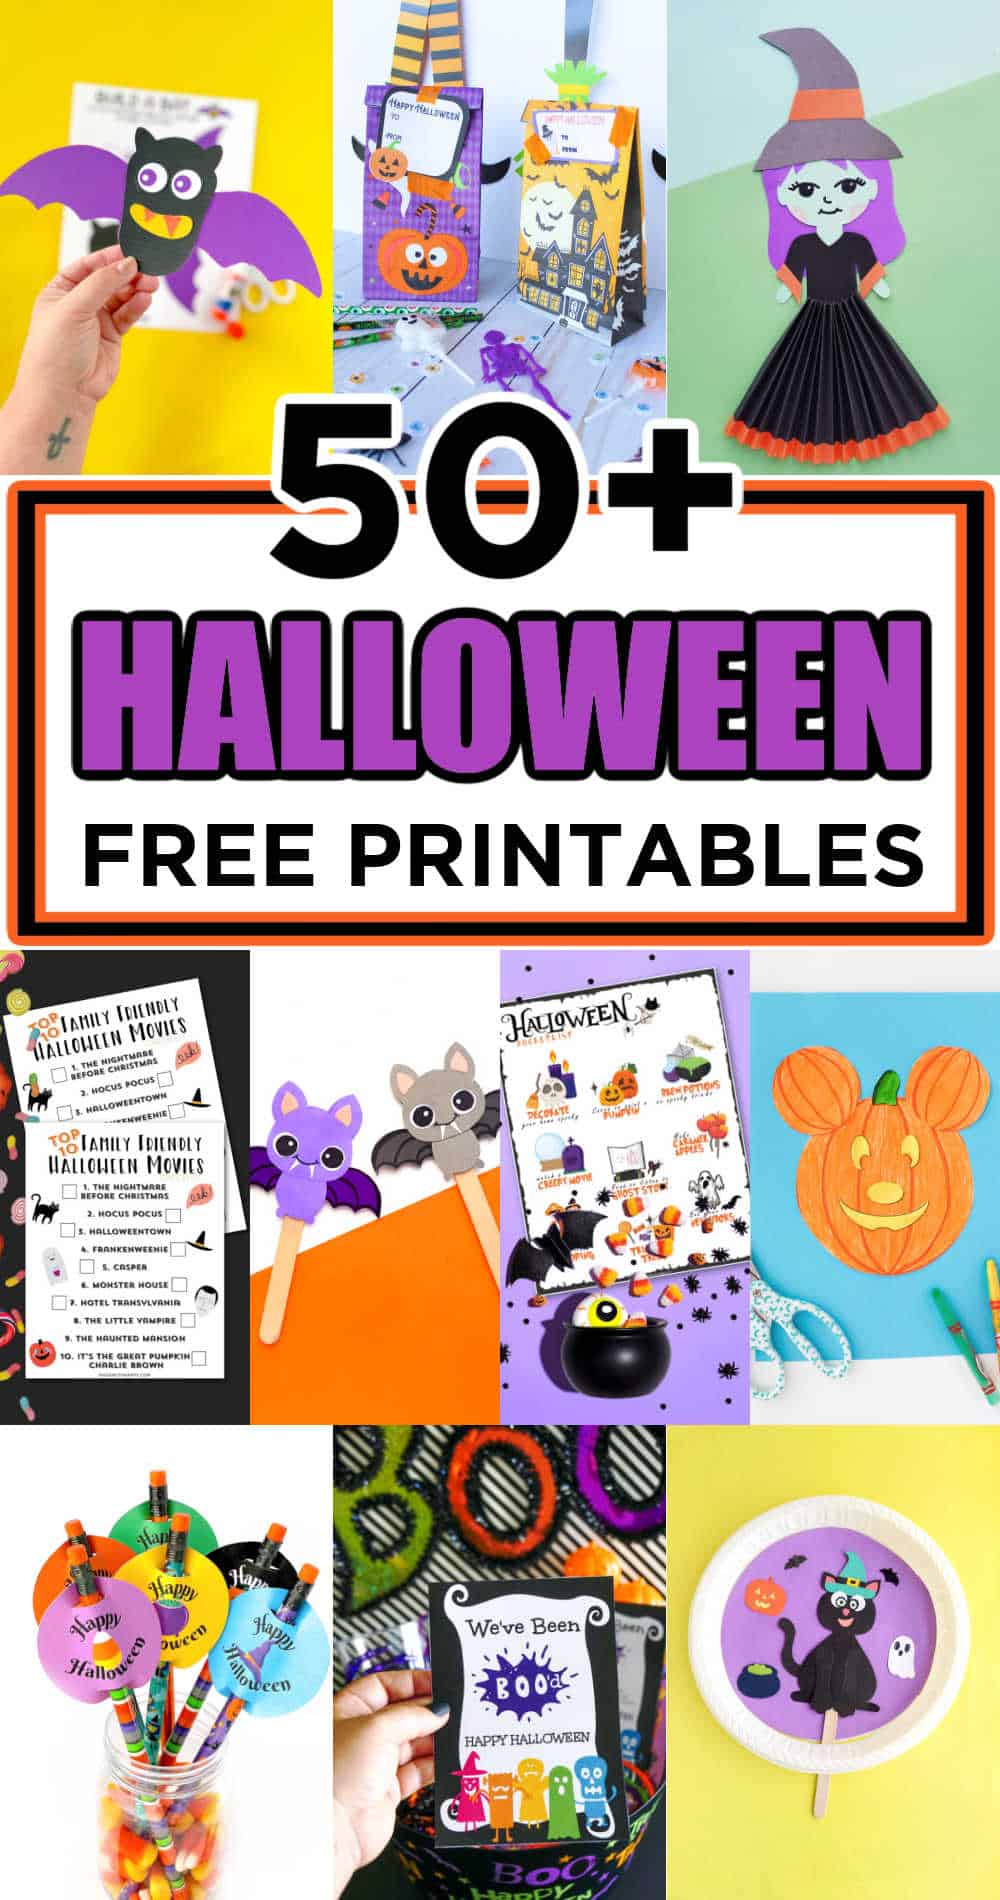 50+ Halloween Free Printables - Made with HAPPY